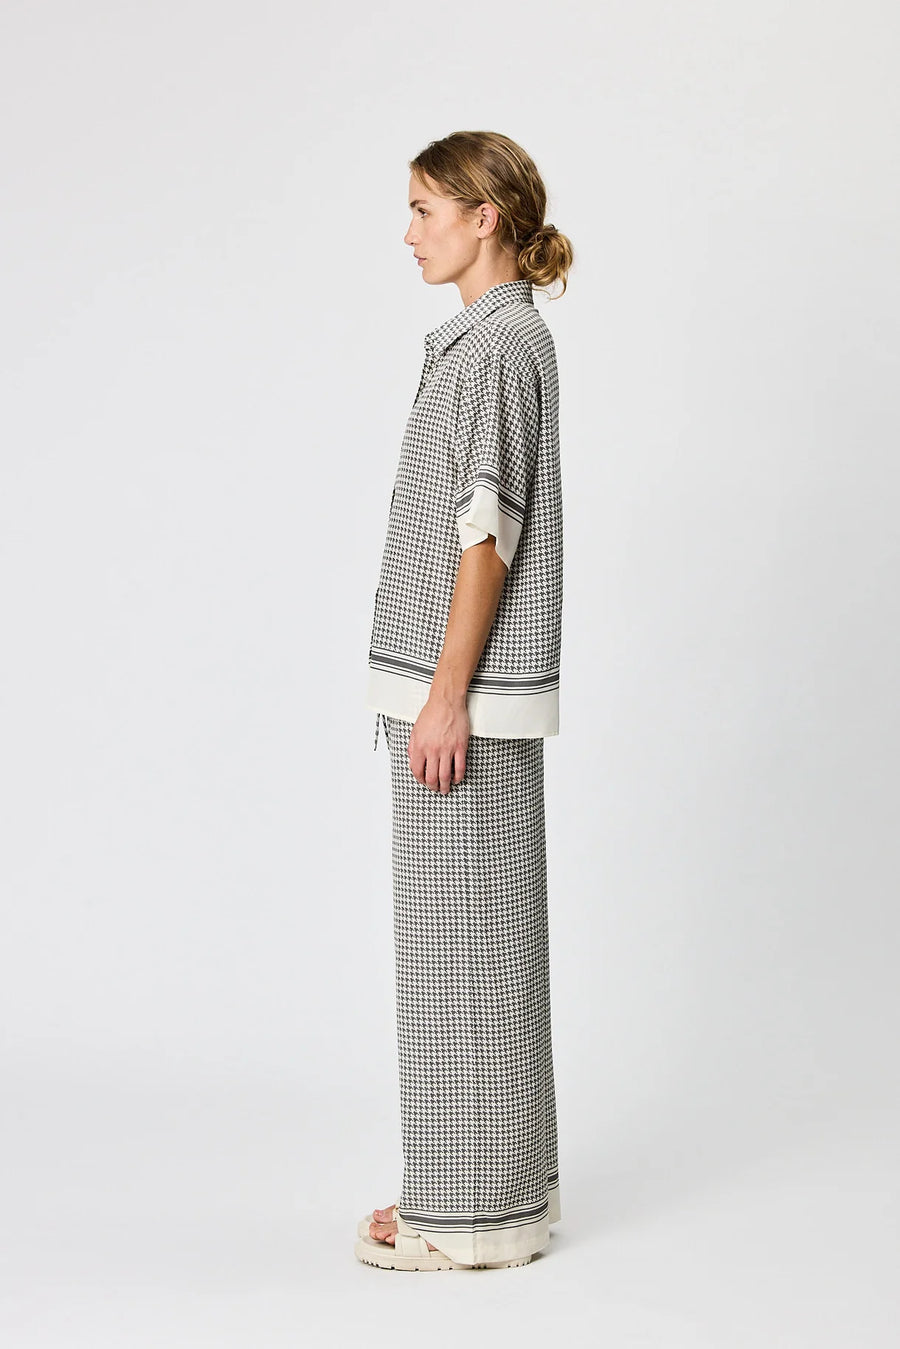 Remain | Blake Wide Leg Pant - Charcoal Houndstooth